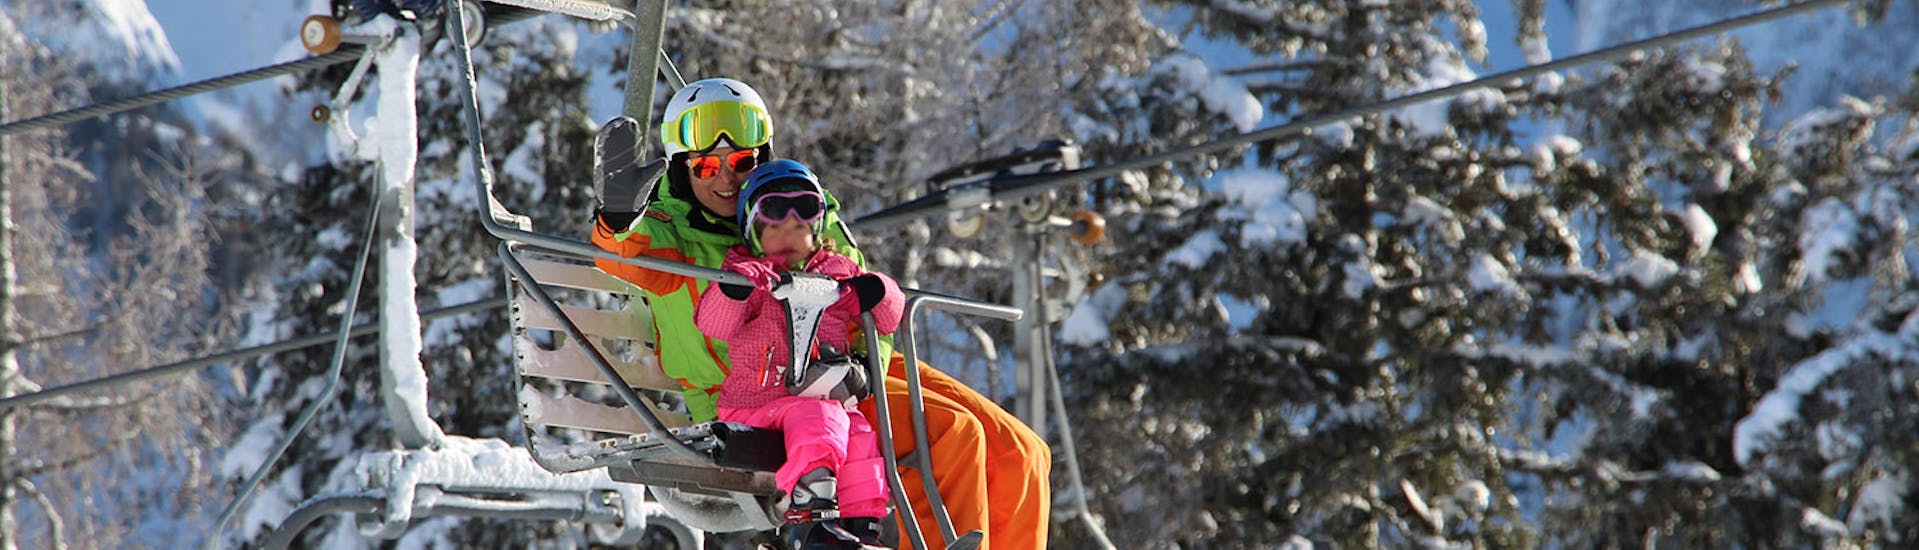 Ski instructor and kid on the chairlift starting one of the private ski lessons for kids of all levels in Folgarida.